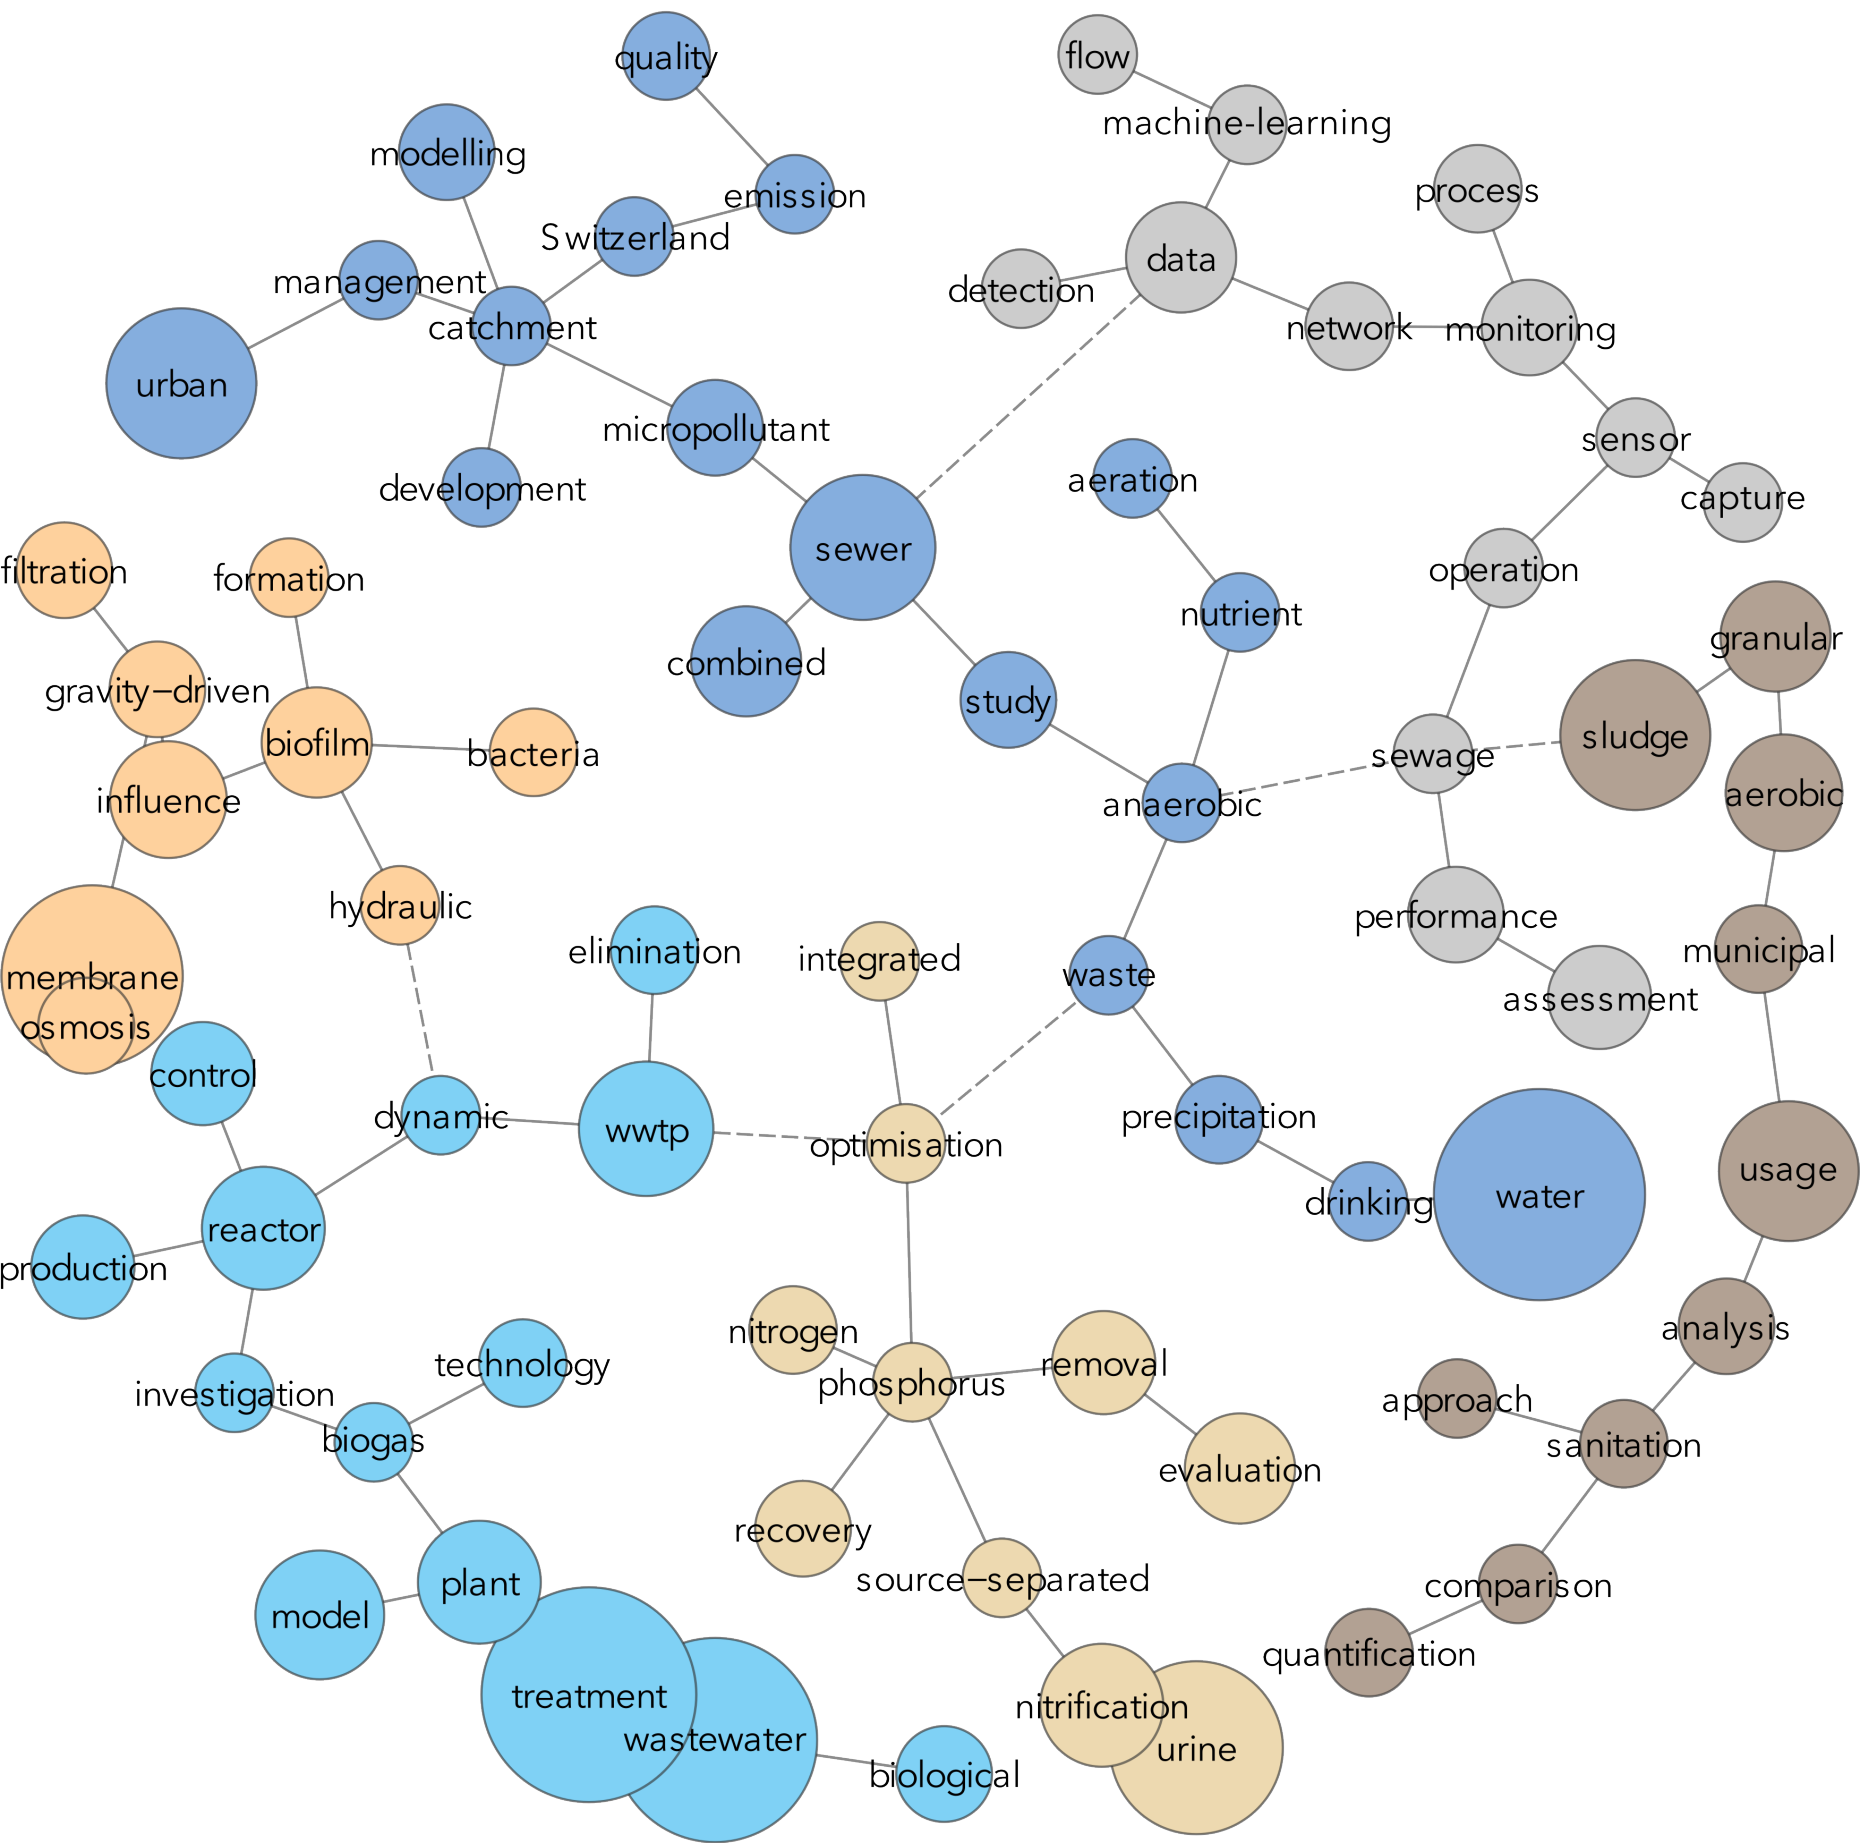 Research network